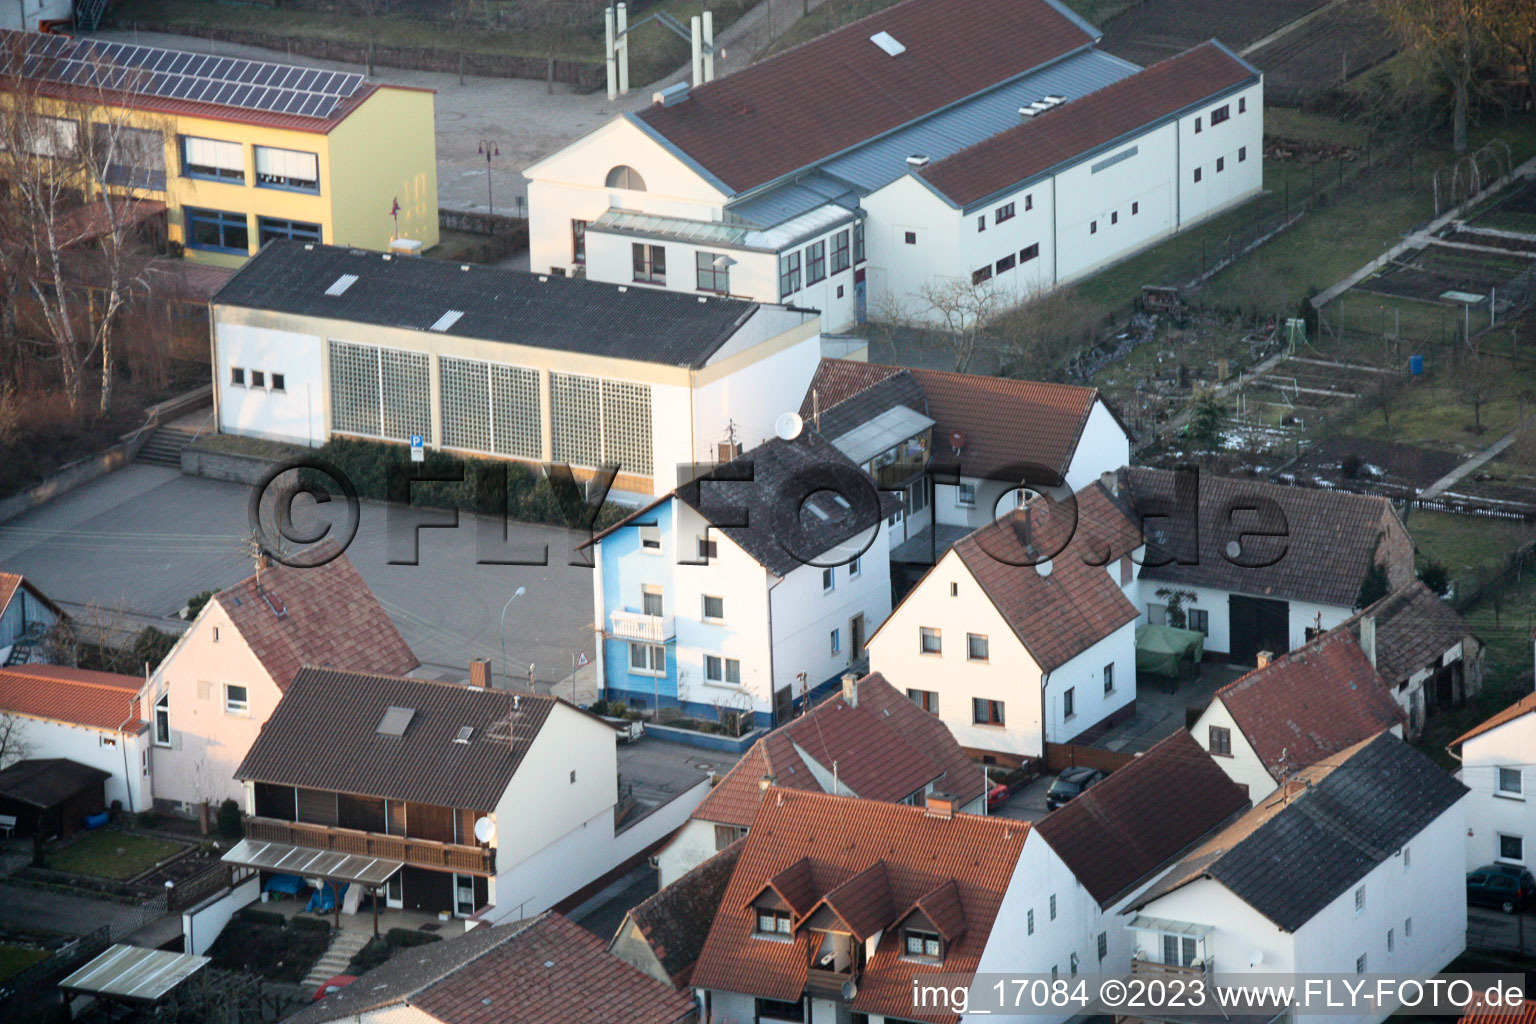 Aerial view of Fire department, sports hall in Minfeld in the state Rhineland-Palatinate, Germany